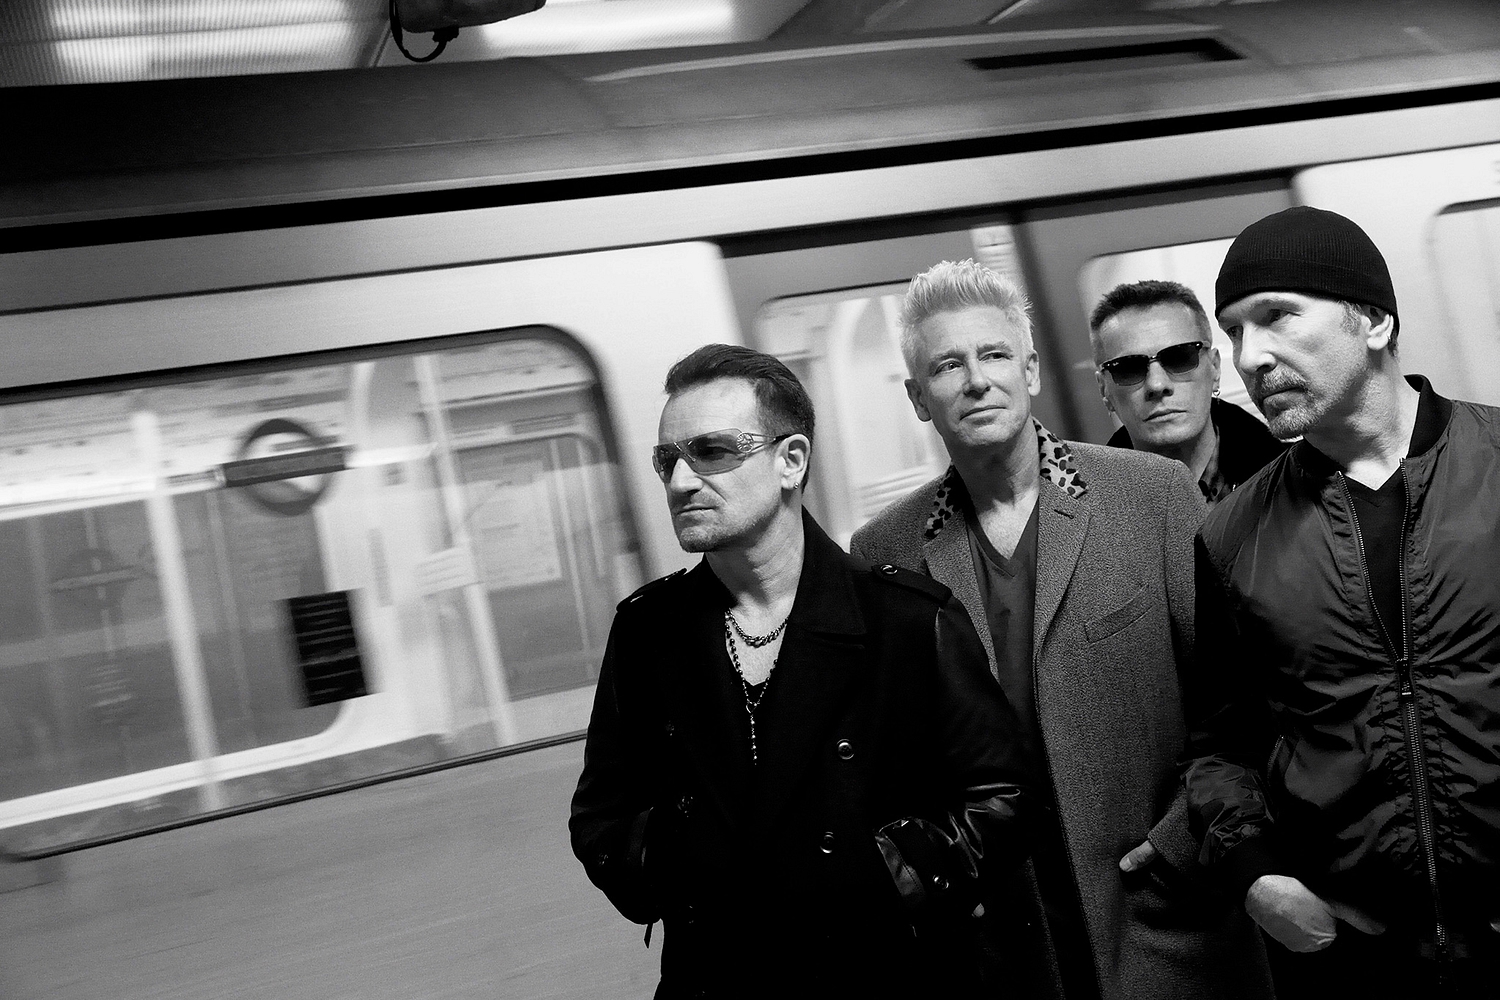 U2 release new album ‘Songs of Innocence’, Apple give it away free today